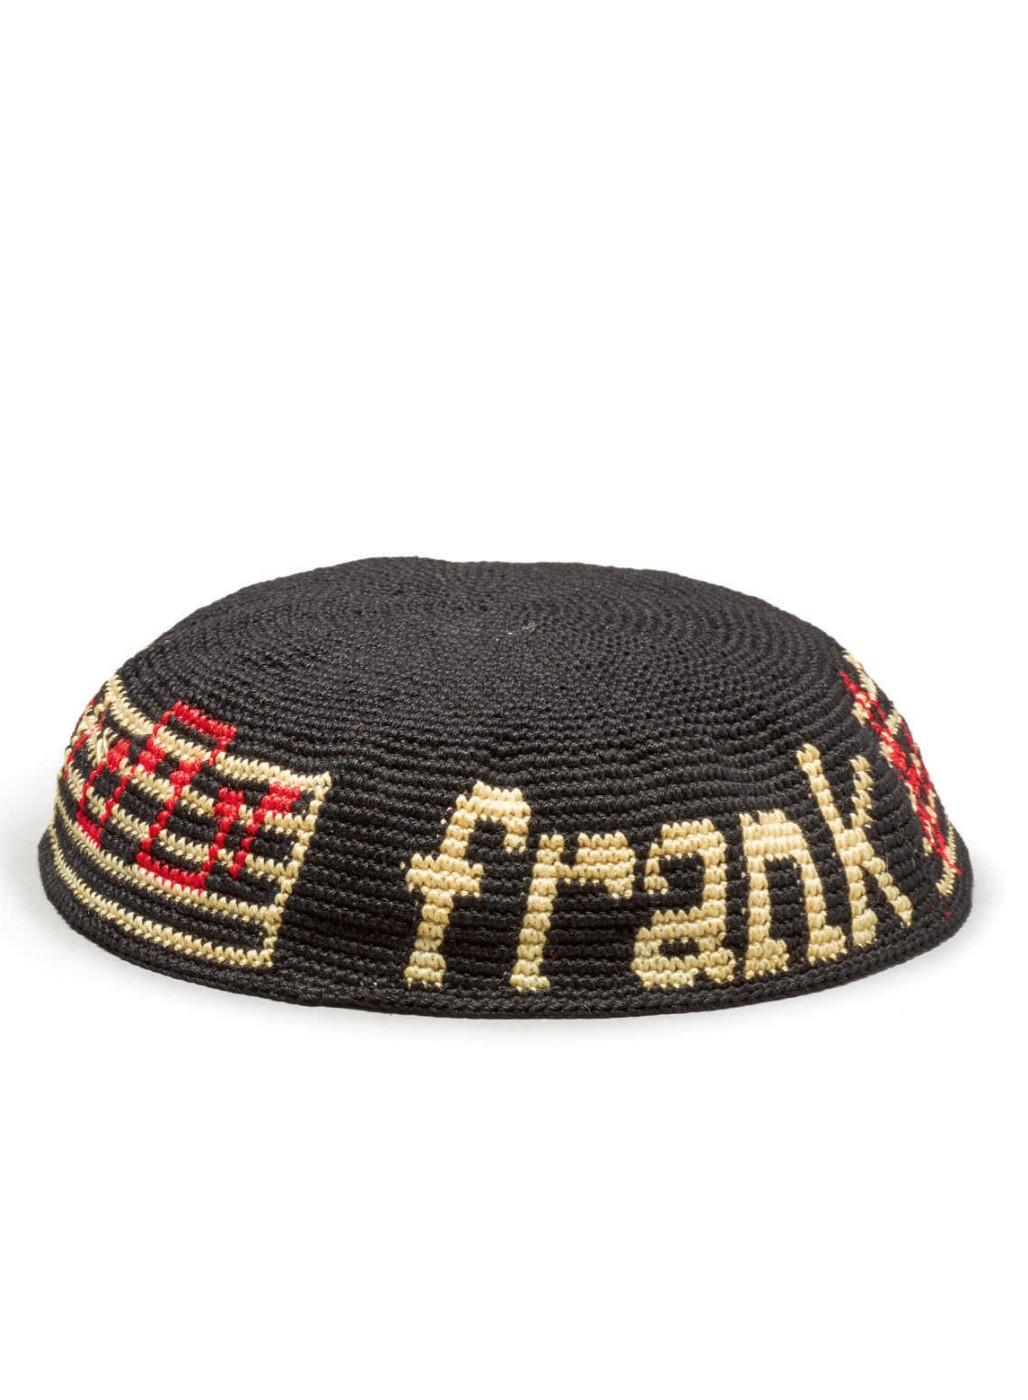 Hand-Crocheted Yarmulke, with Musical Note and "Frank" Border.